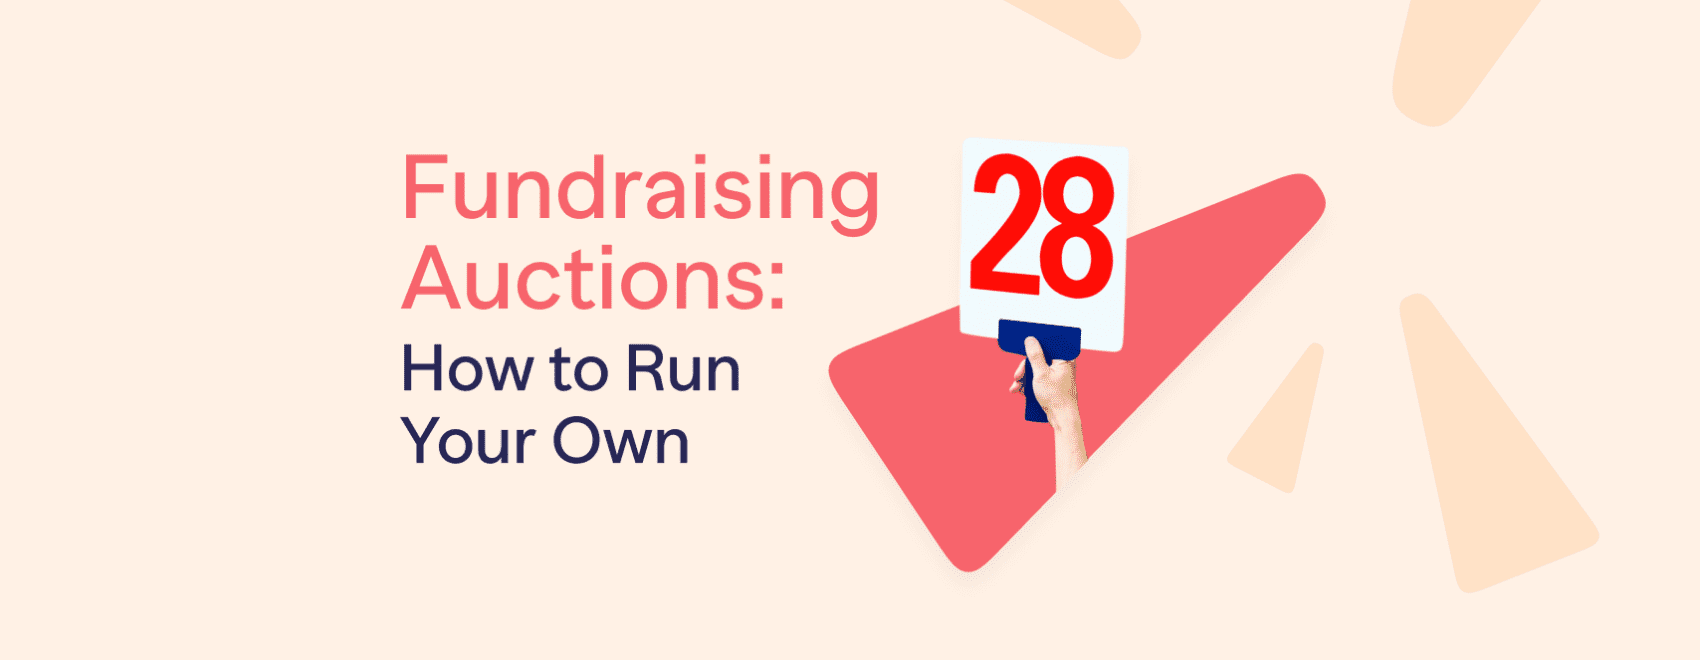 Fundraising auctions